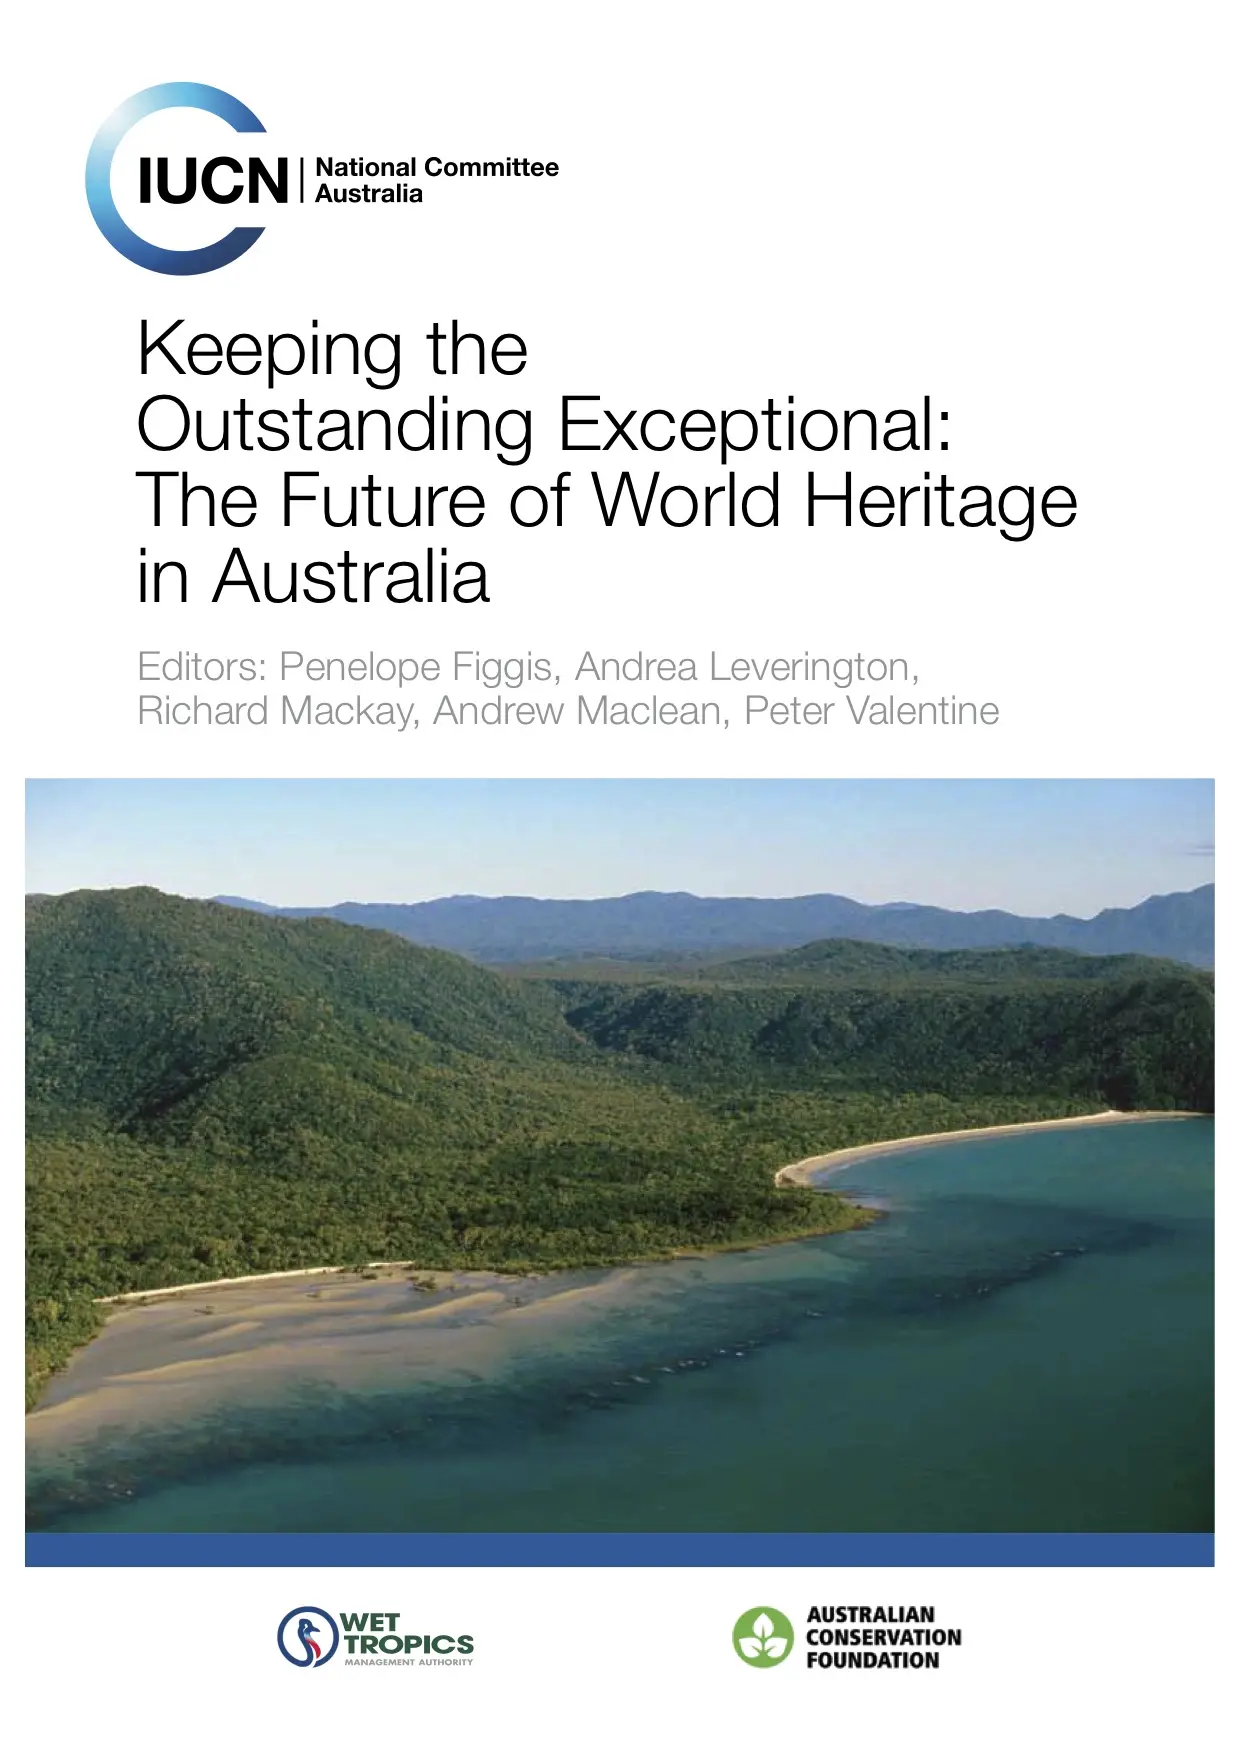 Keeping the Outstanding Exceptional: The Future of World Heritage in Australia